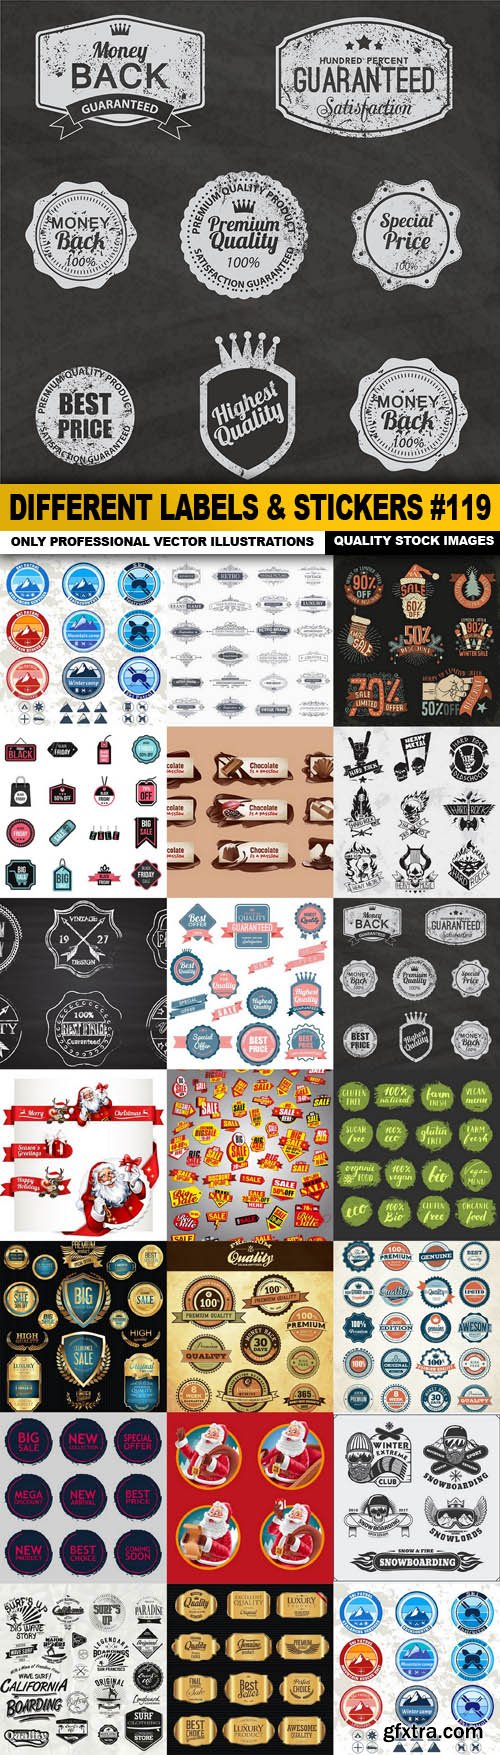 Different Labels & Stickers #119 - 20 Vector